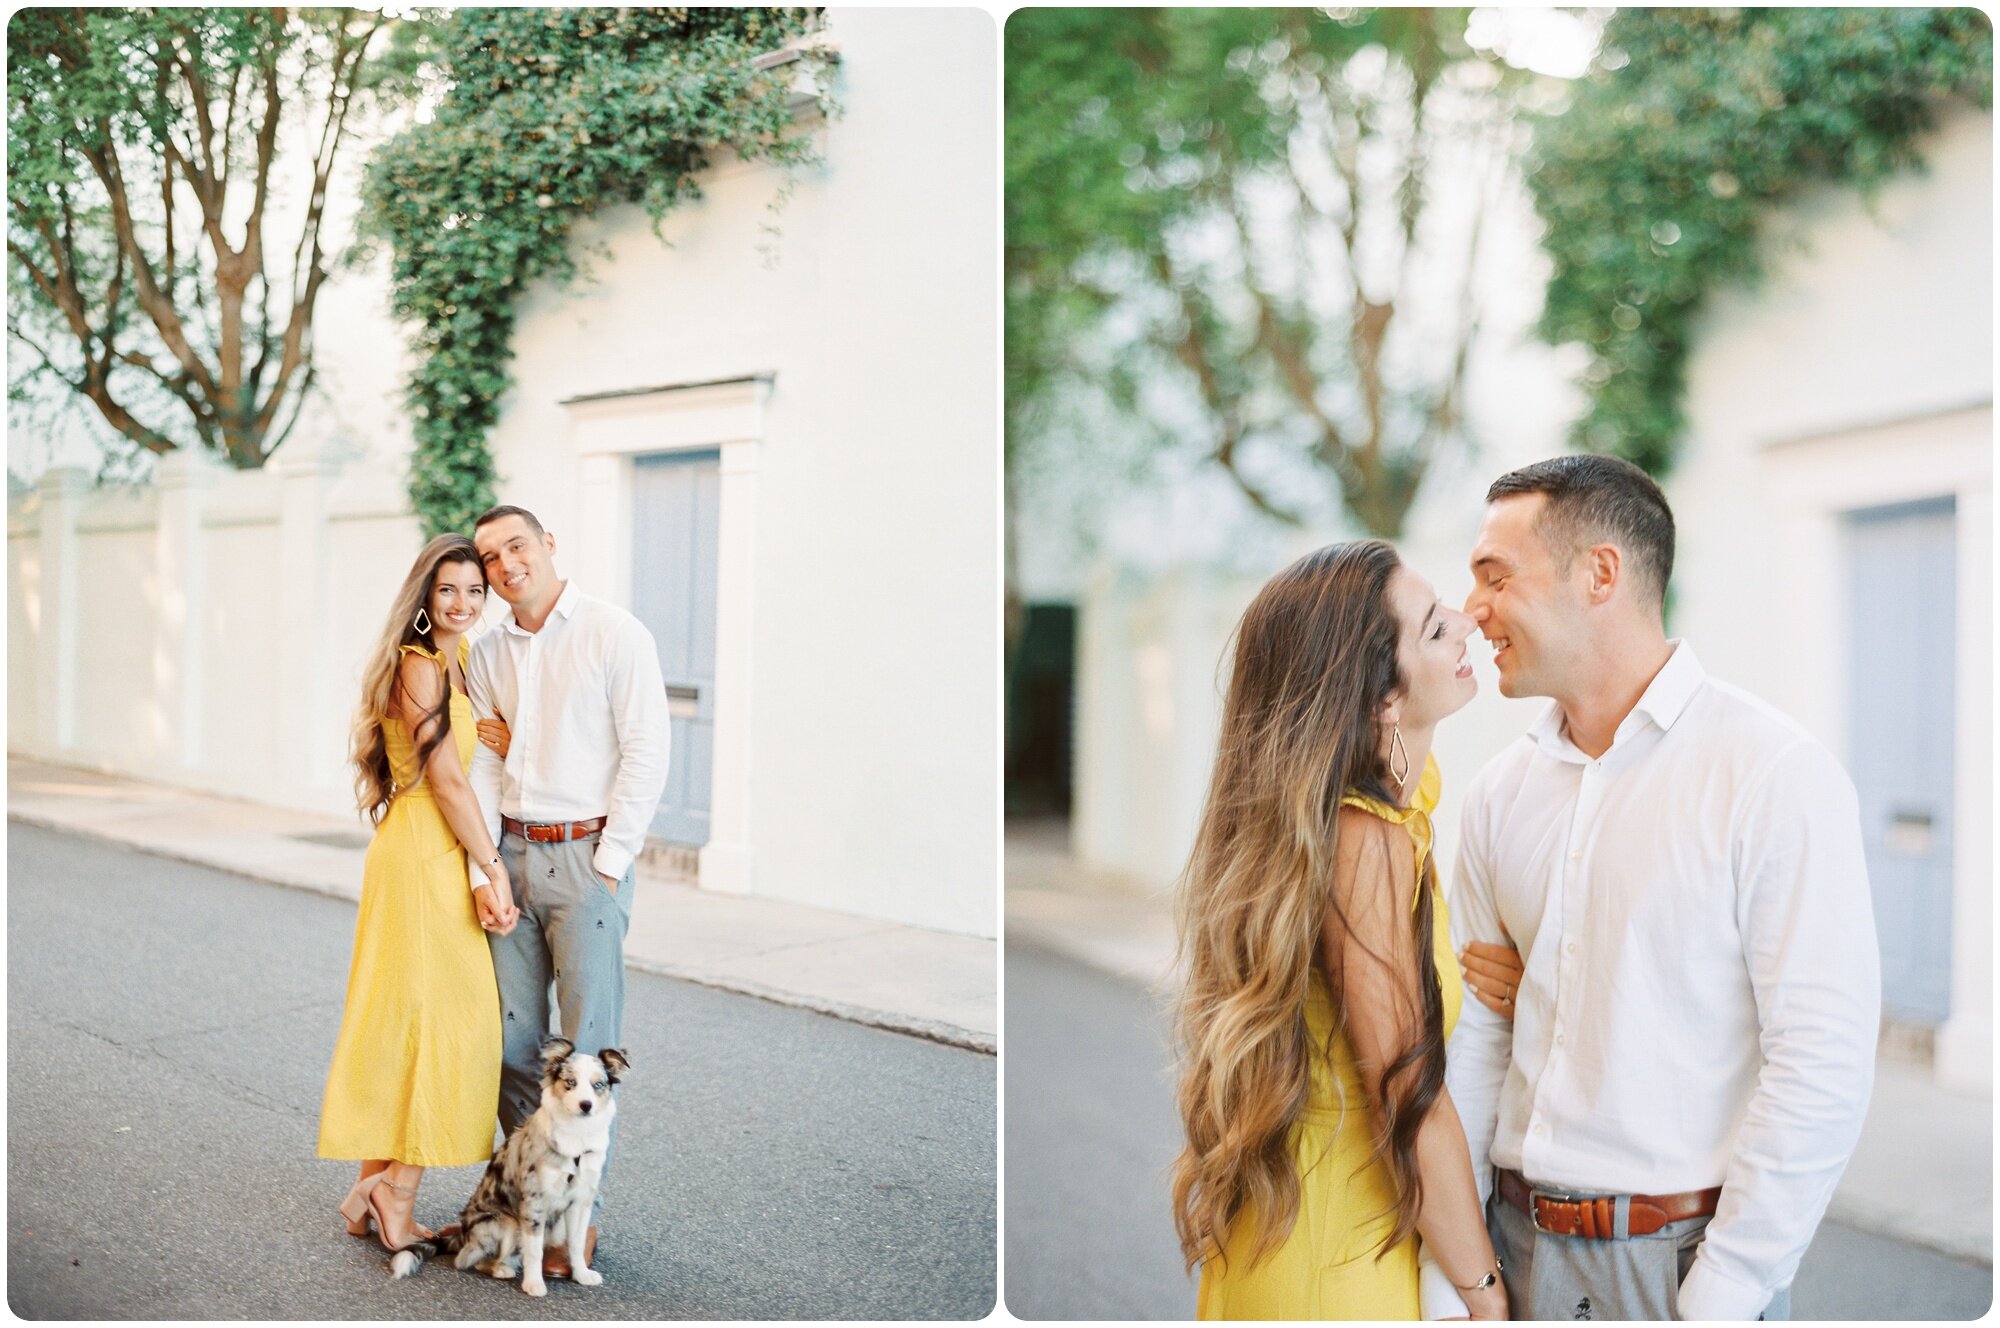 rainbow_row_yellow_blue_outfit_battery_downtown_charleston_engagement_puppy_outdoor_wedding_photographers_husband_wife_team_kailee_tim_kailee_dimeglio_photography_charleston_traveling_photographers_0011.jpg